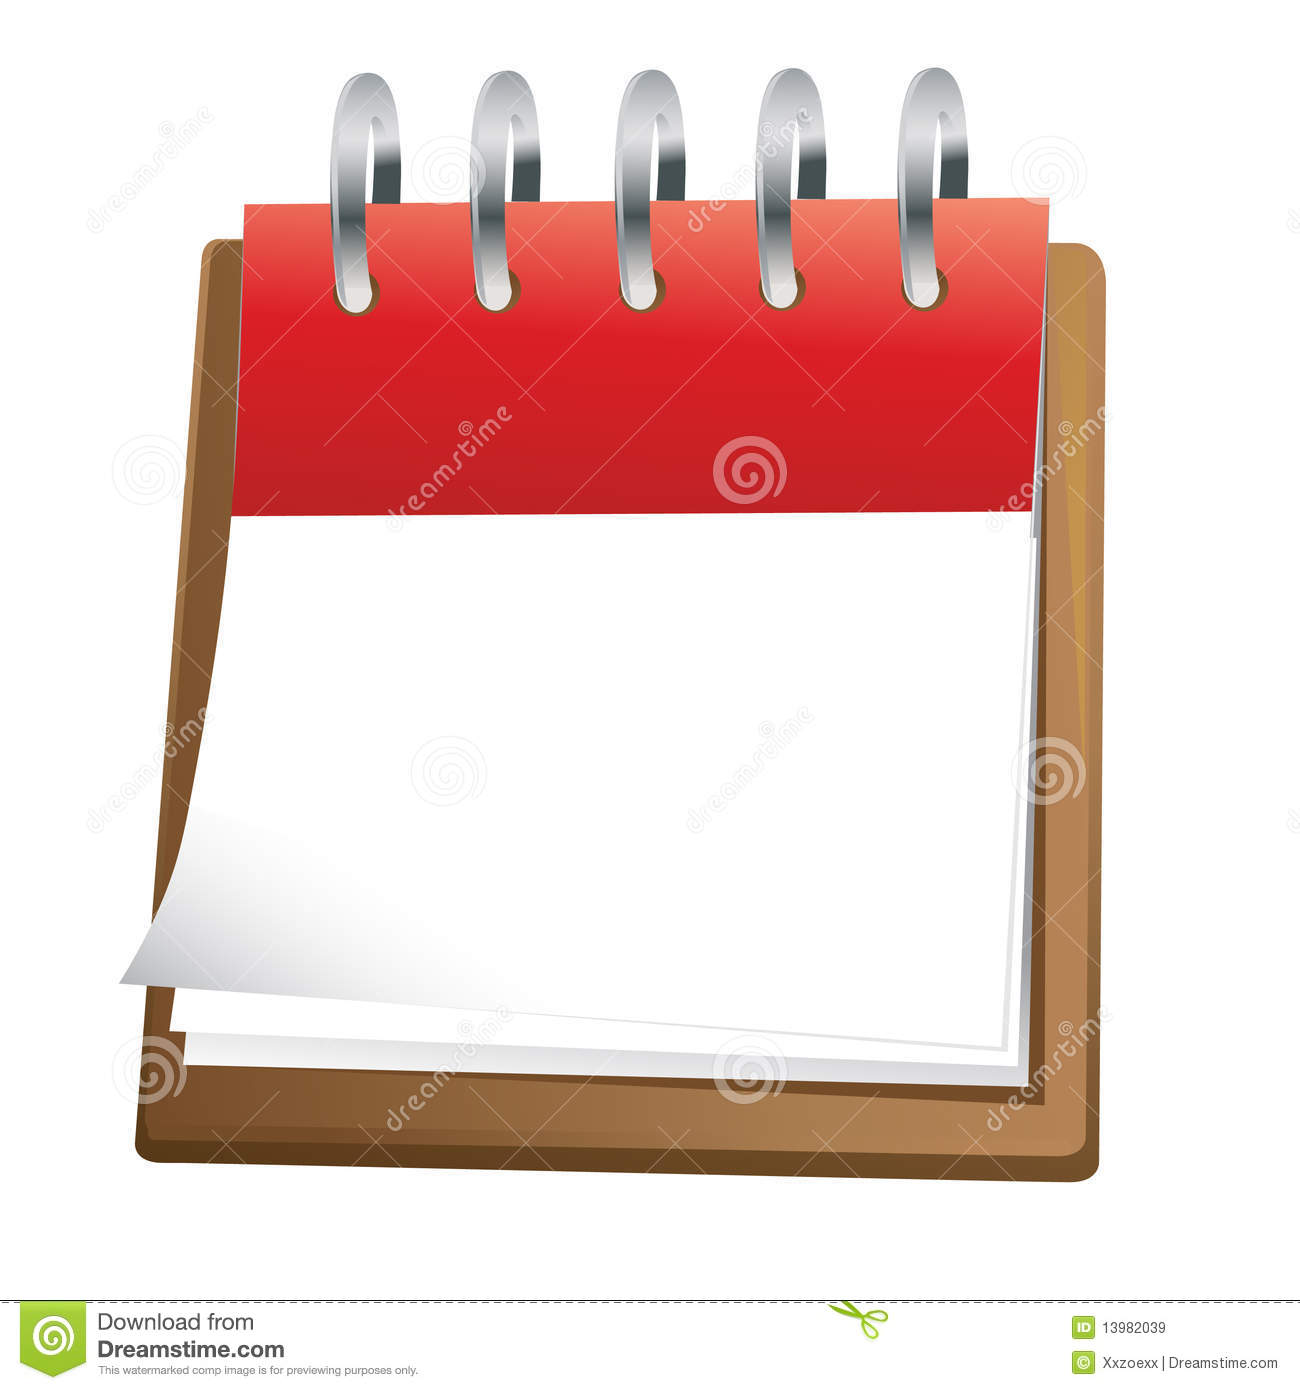 Blank Calendar Clip Art Royalty Free Stock Images   Image  13982039